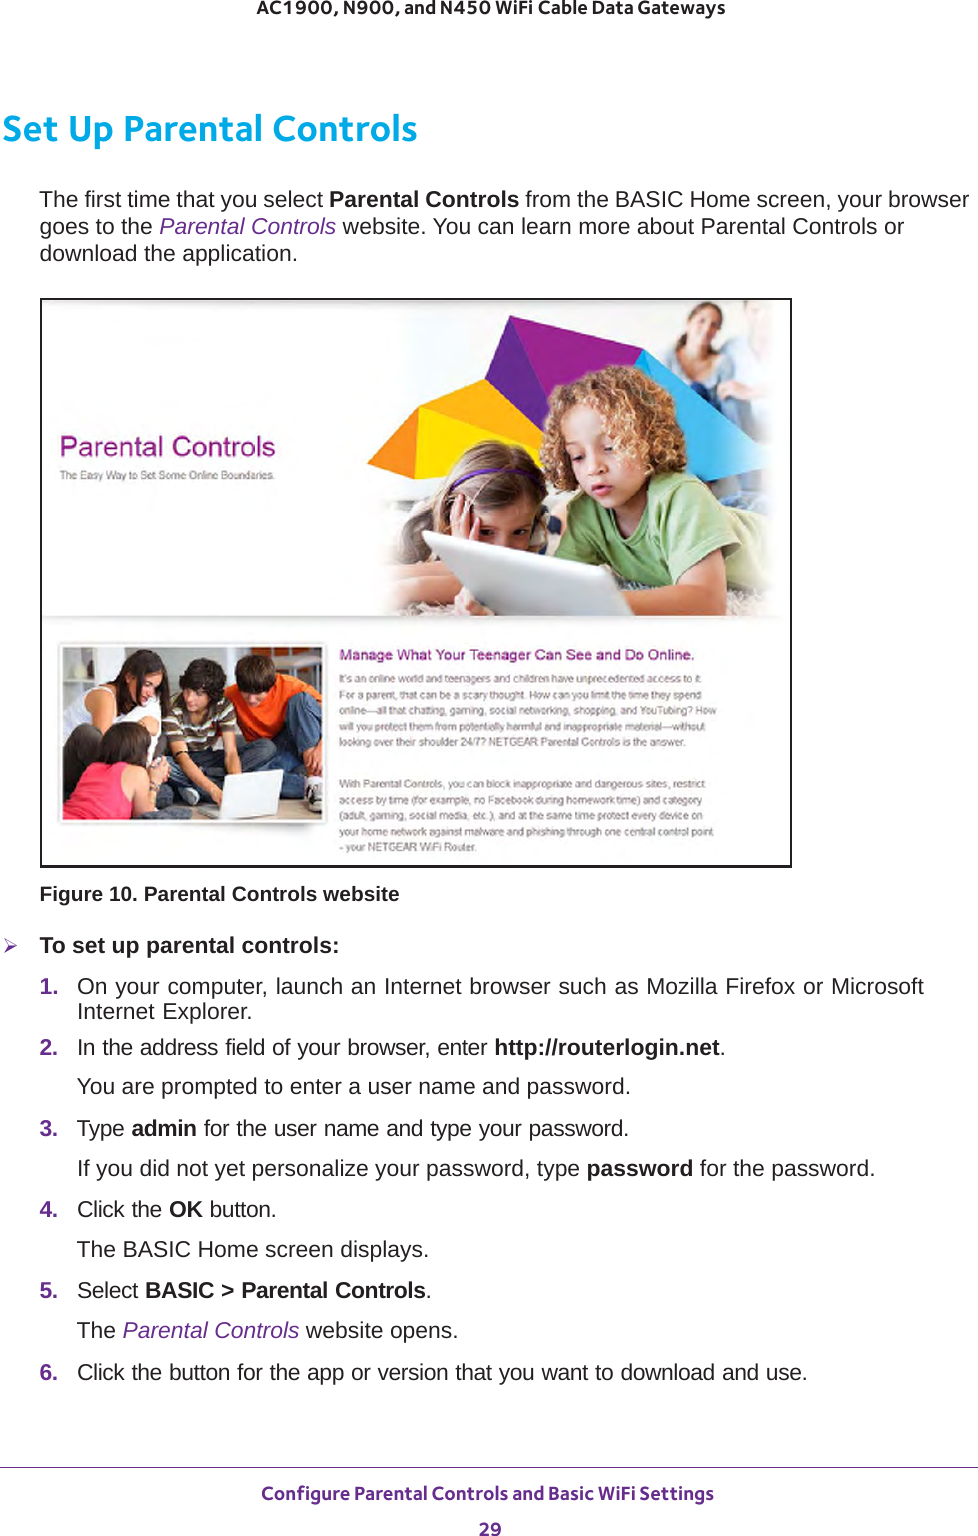 Configure Parental Controls and Basic WiFi Settings 29 AC1900, N900, and N450 WiFi Cable Data GatewaysSet Up Parental ControlsThe first time that you select Parental Controls from the BASIC Home screen, your browser goes to the Parental Controls website. You can learn more about Parental Controls or download the application. Figure 10. Parental Controls websiteTo set up parental controls:1.  On your computer, launch an Internet browser such as Mozilla Firefox or Microsoft Internet Explorer. 2.  In the address field of your browser, enter http://routerlogin.net.You are prompted to enter a user name and password.3.  Type admin for the user name and type your password.If you did not yet personalize your password, type password for the password.4.  Click the OK button. The BASIC Home screen displays.5.  Select BASIC &gt; Parental Controls.The Parental Controls website opens.6.  Click the button for the app or version that you want to download and use.